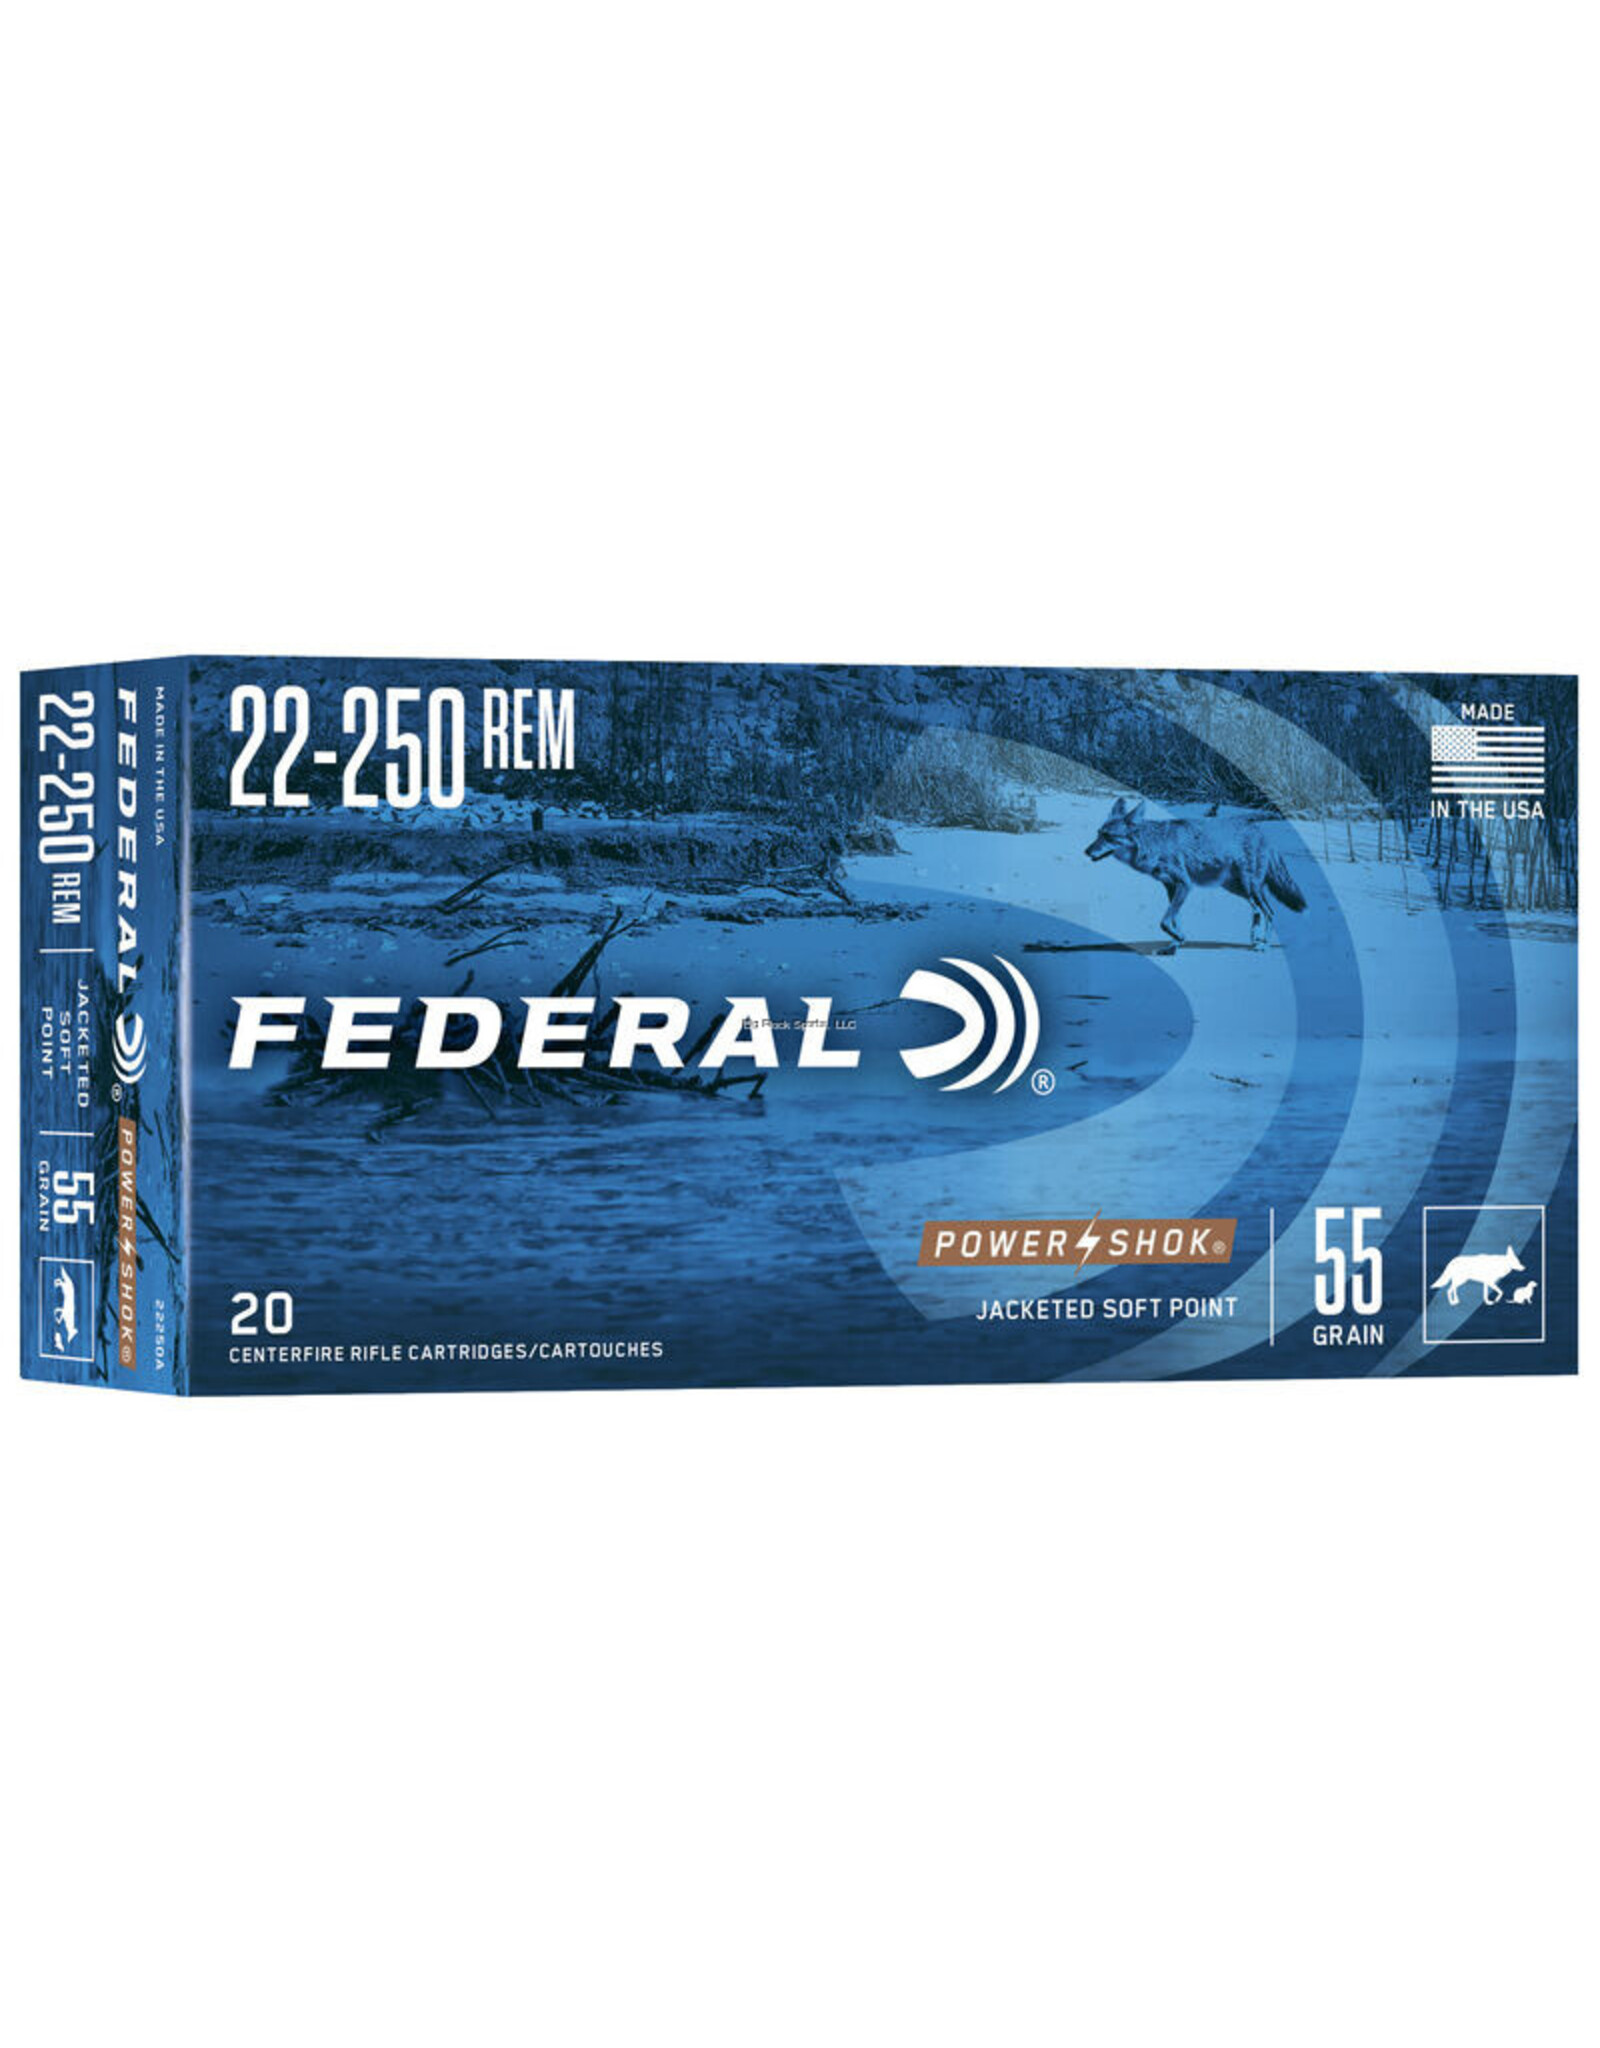 Federal Federal 22250A Power-Shok Rifle Ammo 22-250 REM, SP, 55 Grains, 3650 fps, 20, Boxed